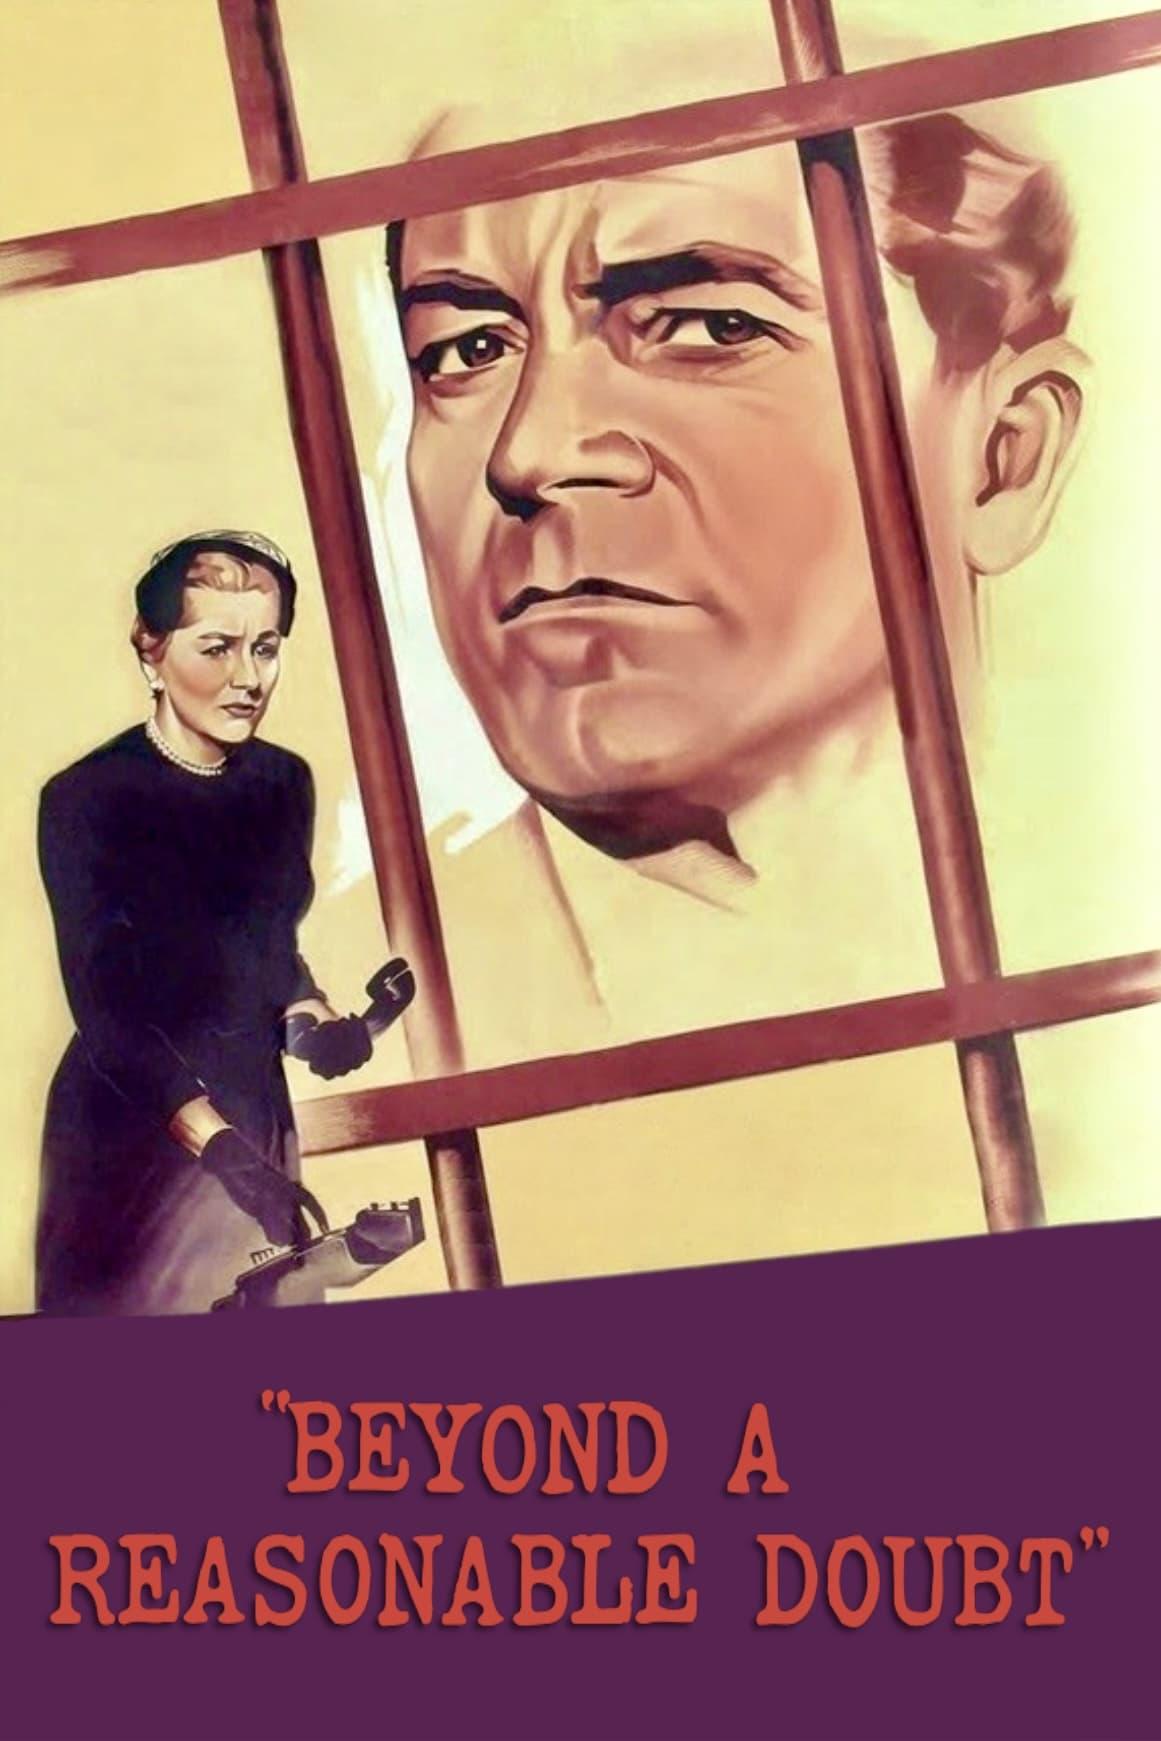 Beyond a Reasonable Doubt poster